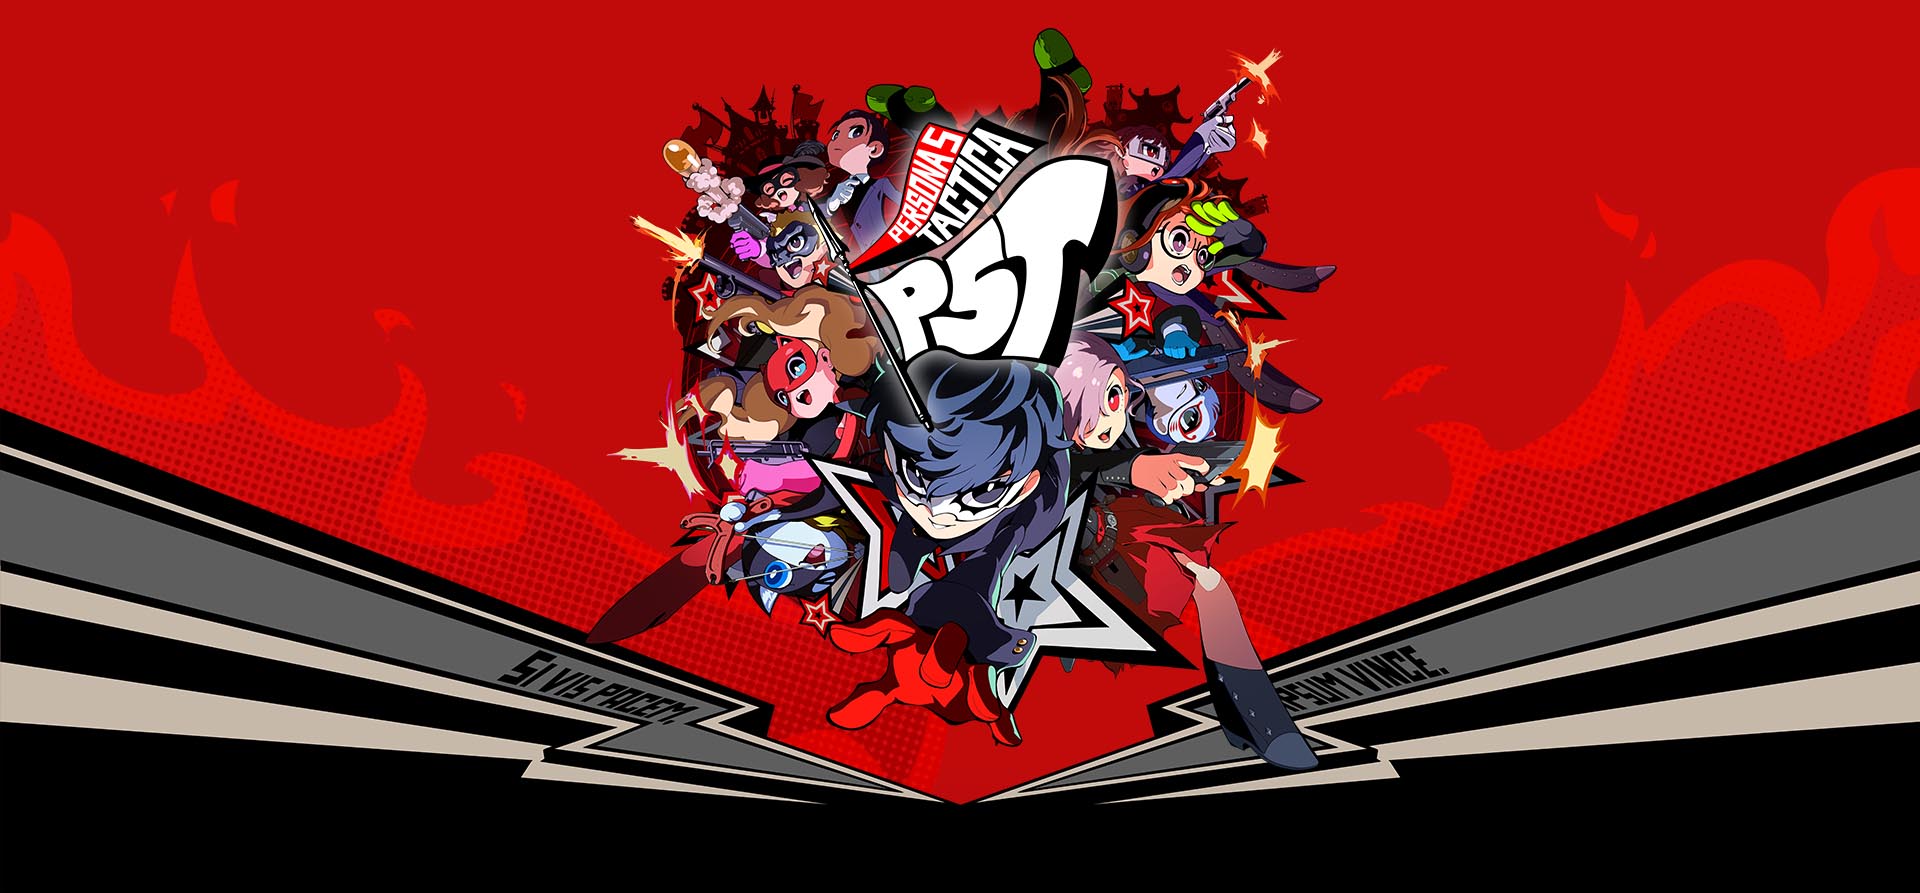 Everything We Know About Persona 5 Tactica: Release Date